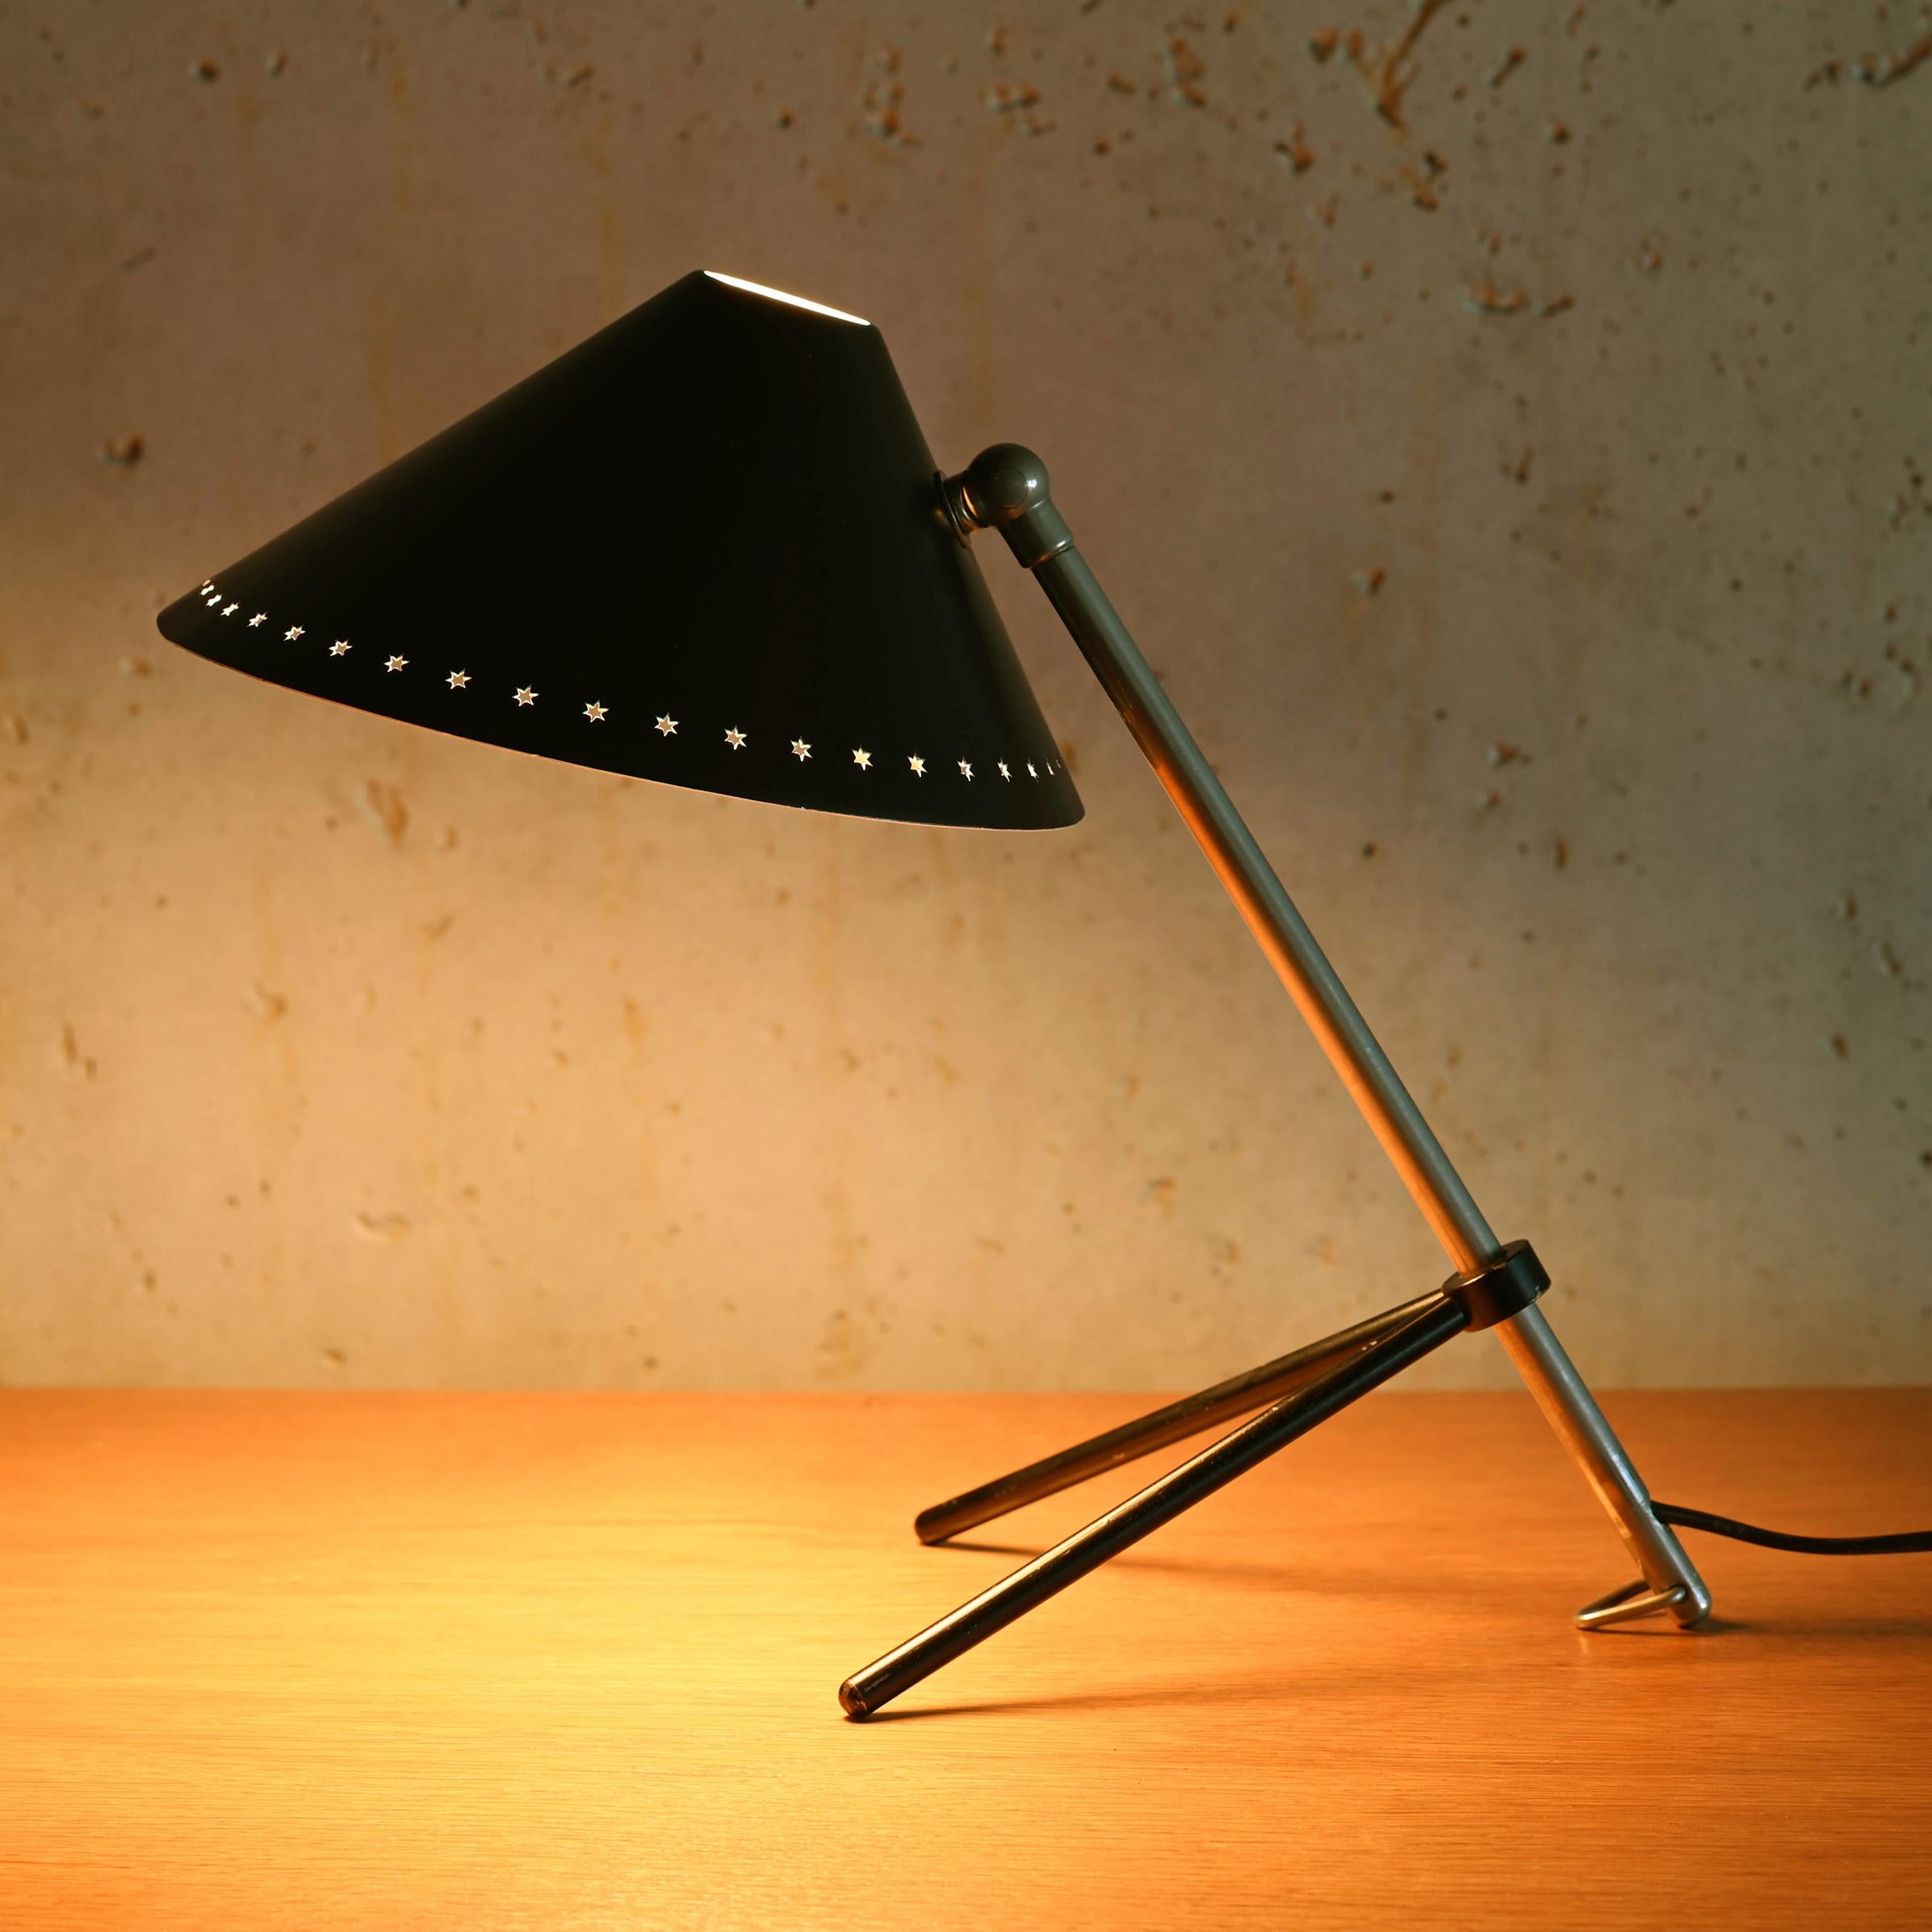 Dutch Pinocchio Lamp with black shade by H. Busquet for Hala Zeist, Netherlands